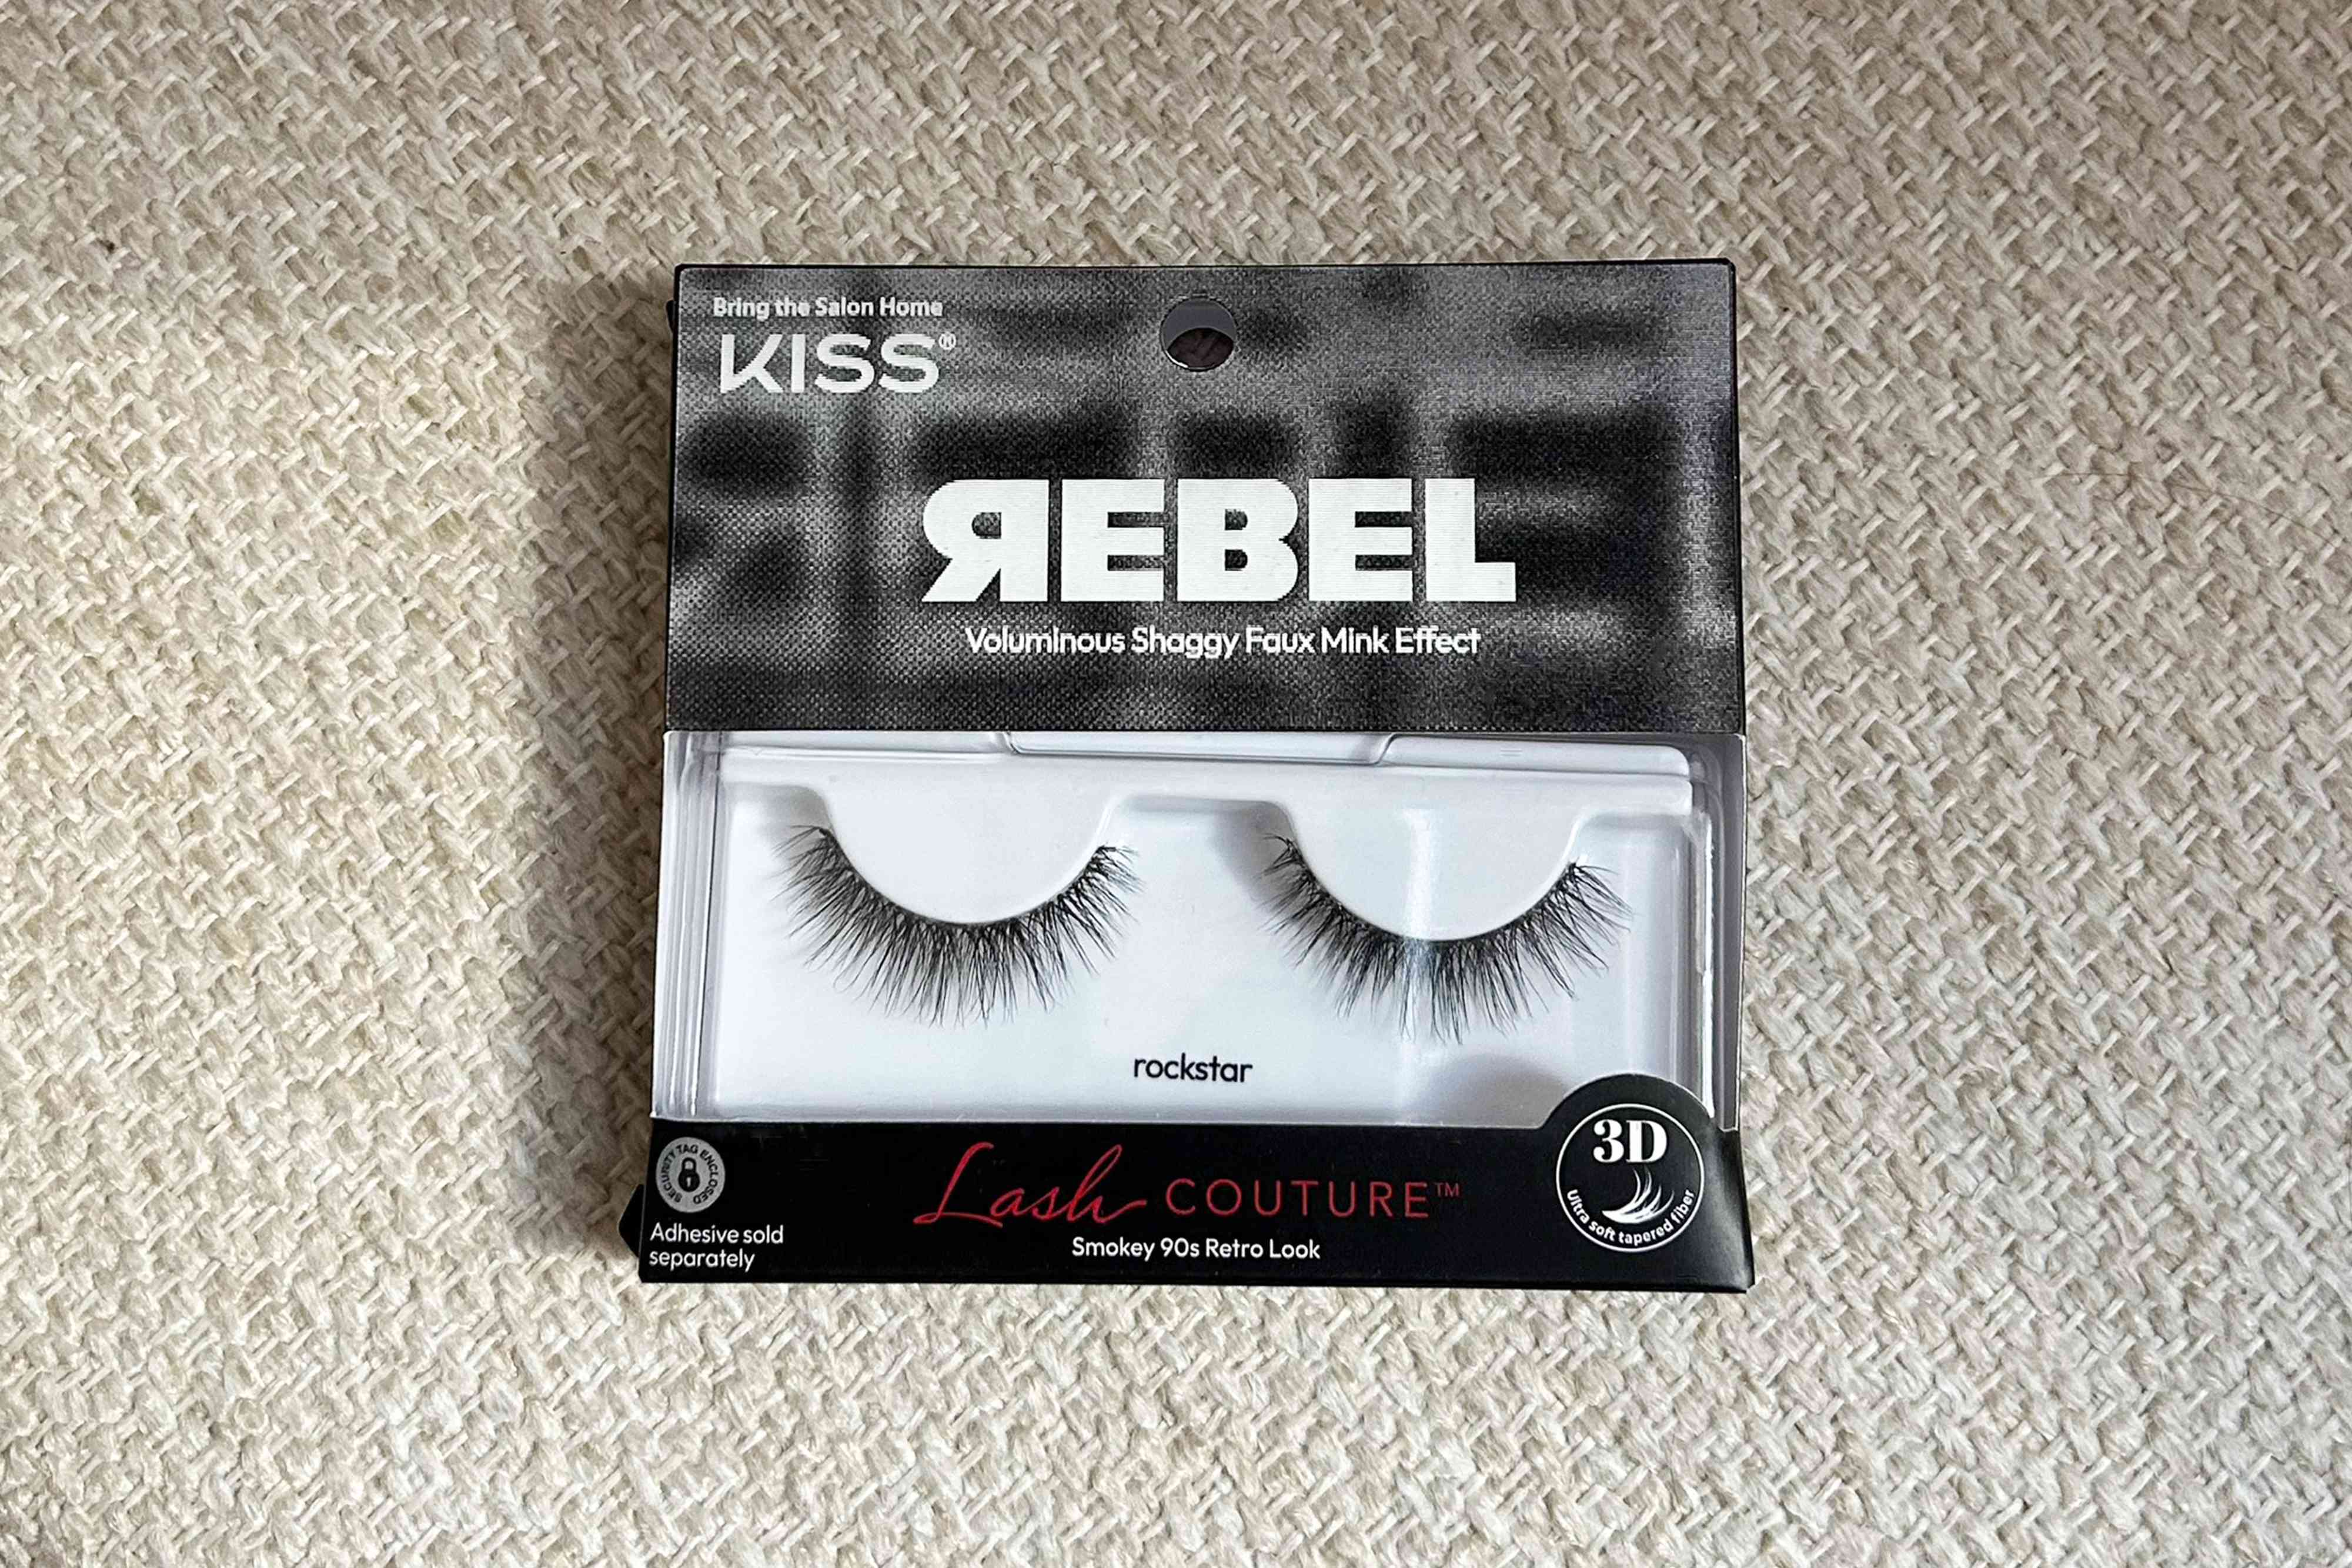 Kiss Lash Couture Rebel Rockstar on flat patterned surface